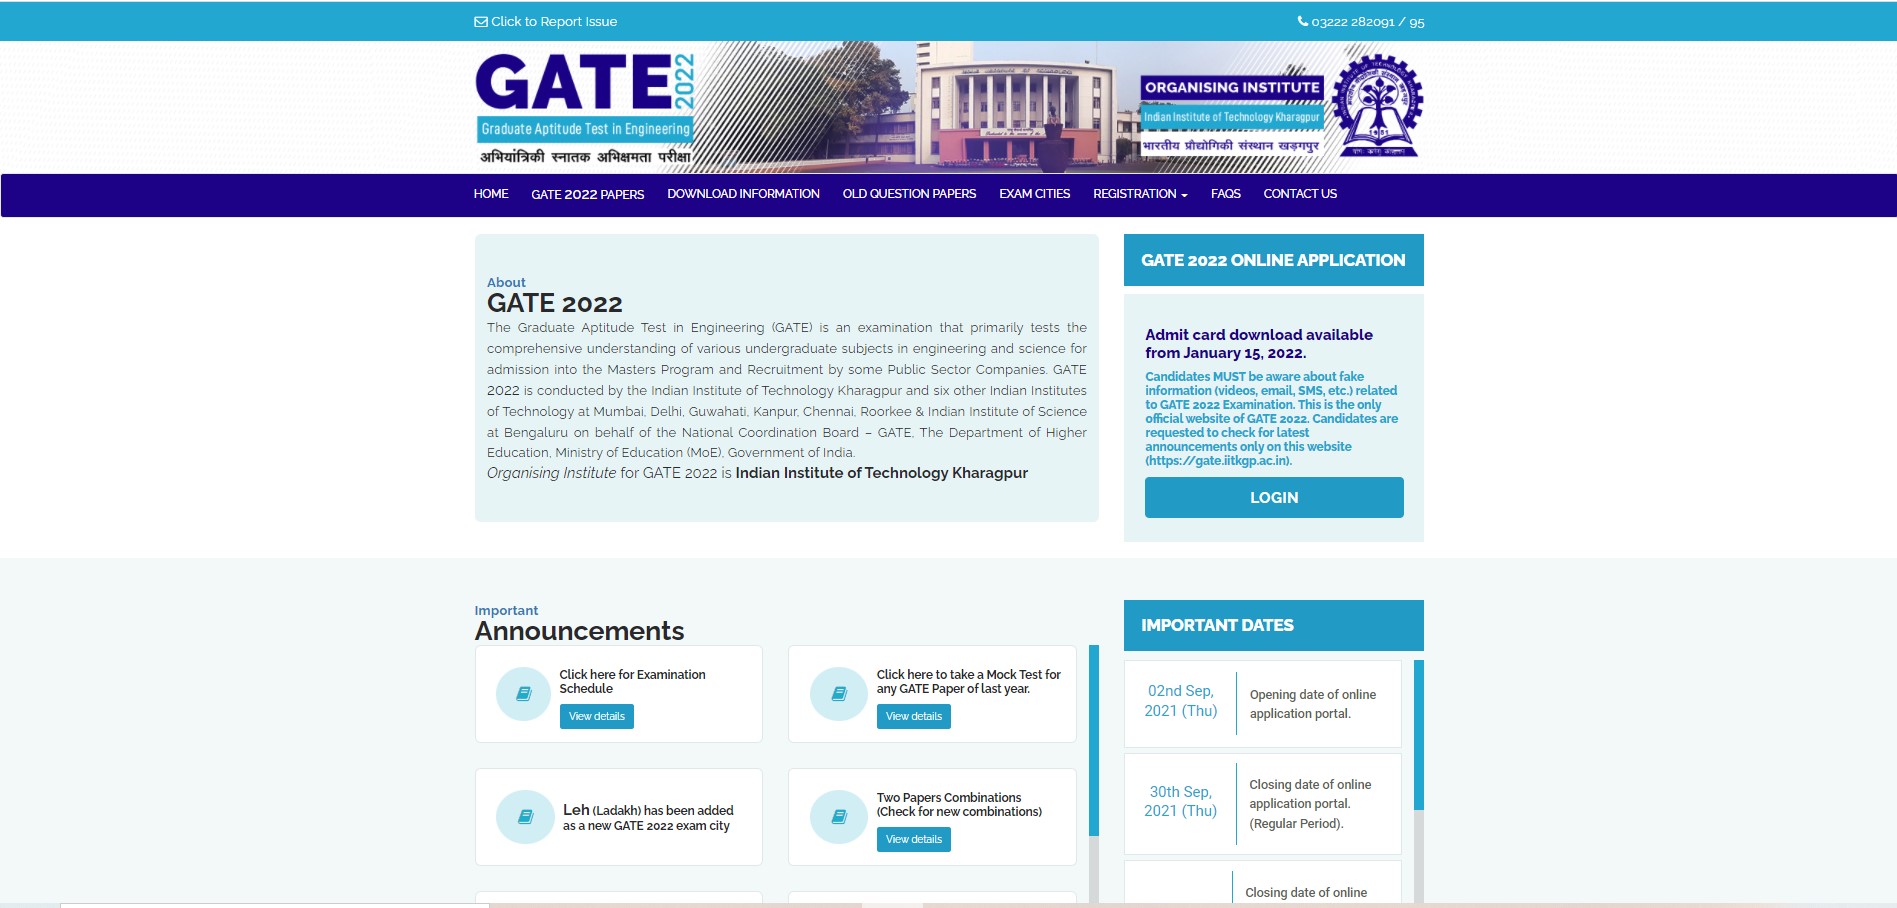 The Graduate Aptitude Test in Engineering (GATE) Official Website